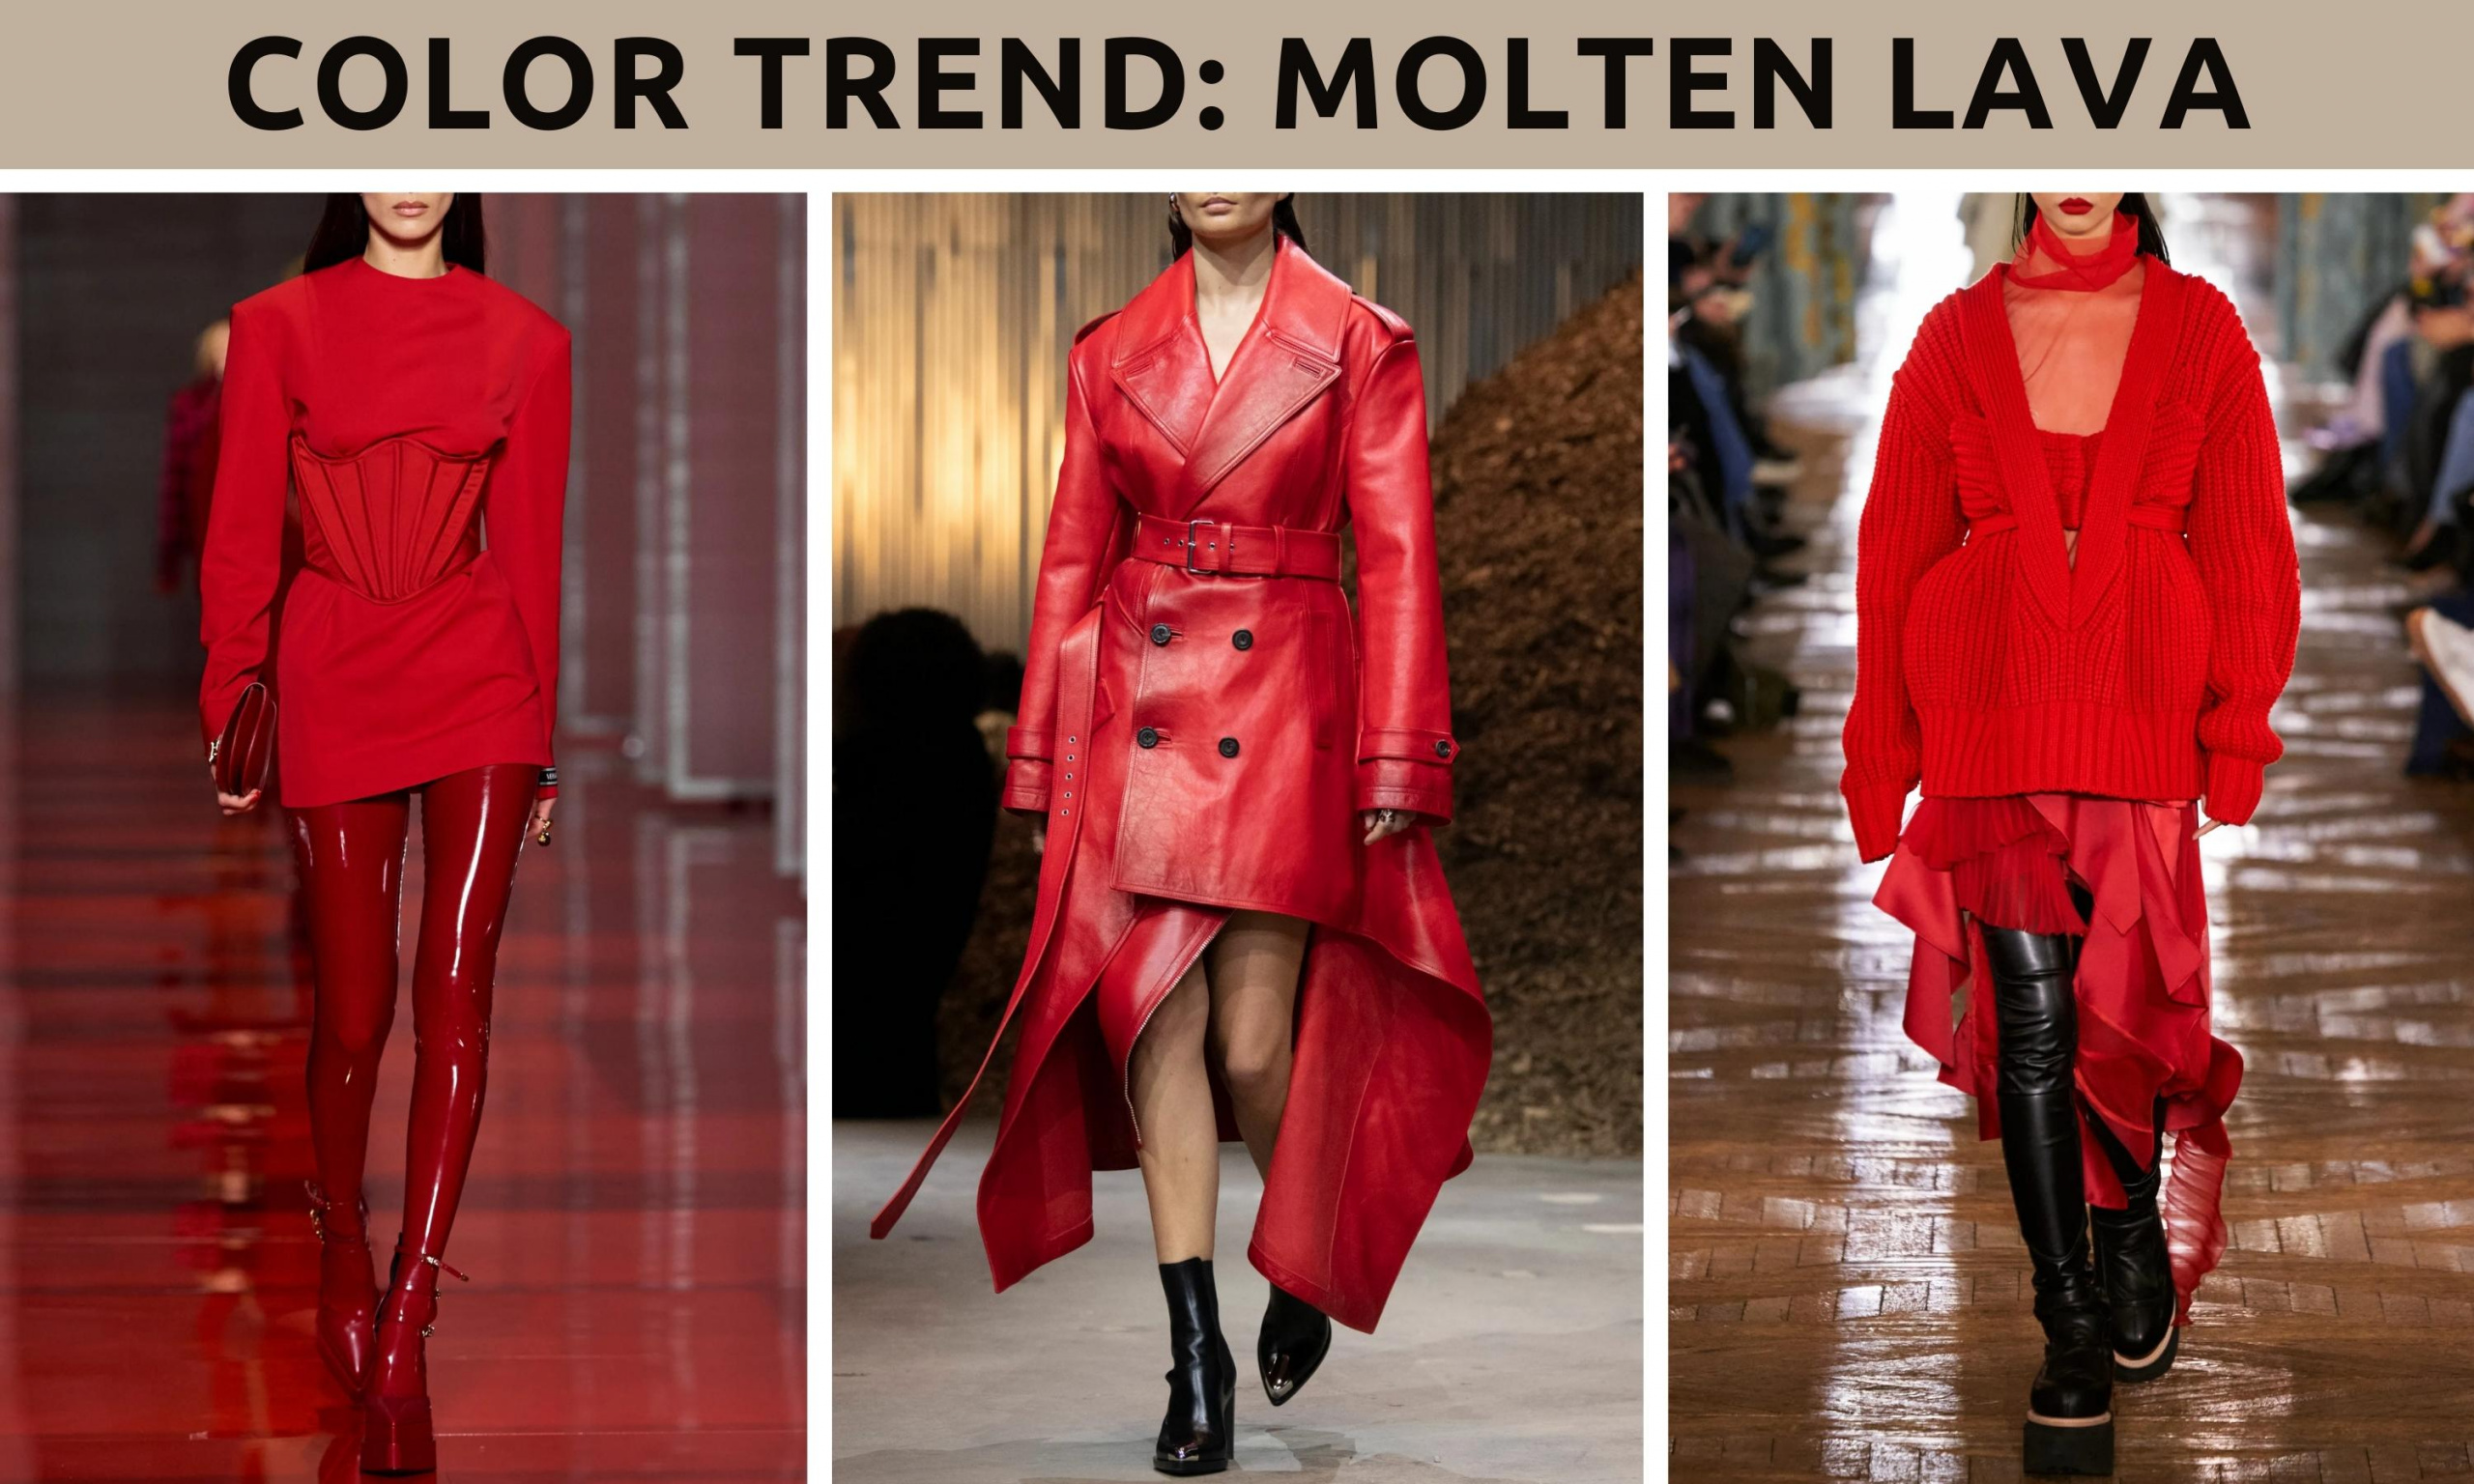 wearable fall trends, fall fashion trends, fall trends, wearable trends, how to wear trends, trends over 40, wearing trends over 40, 2022 fall fashion trends, 2022 wearable fall trends, molten lava, 2022 color trends, bright red color trend